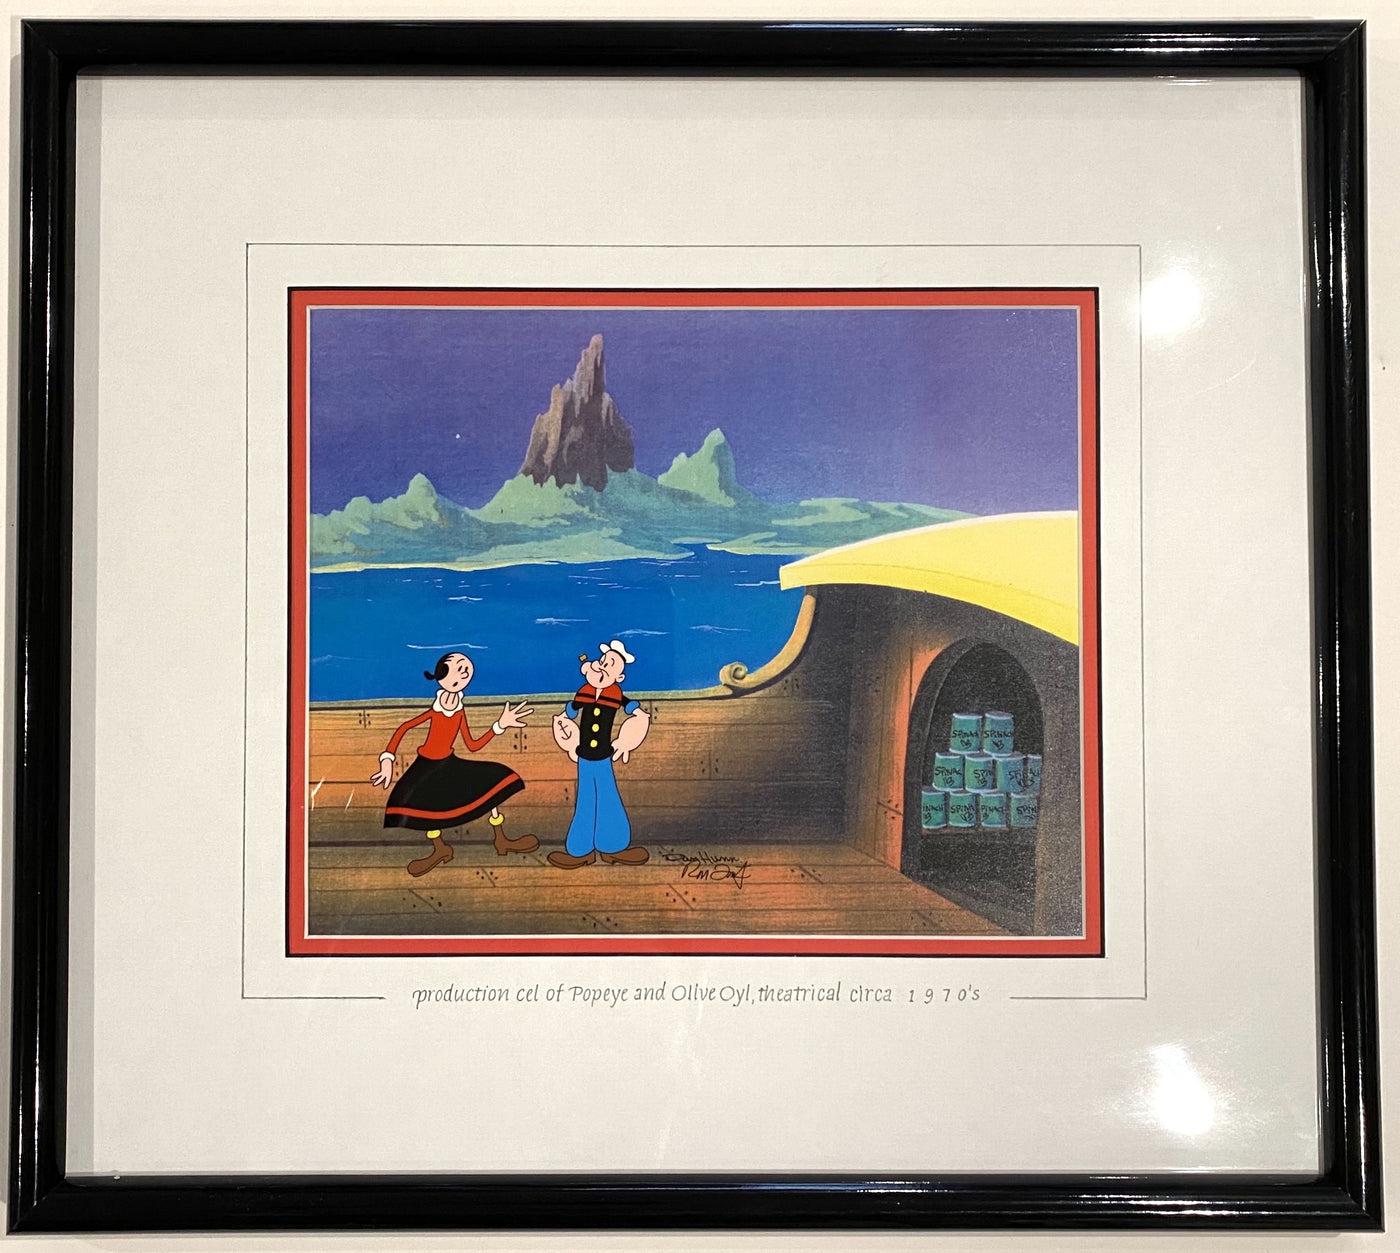 Original Production Cel on Color Copy Background featuring Popeye and Olive Oyl Signed by Dan Hunn and Herb Fritz